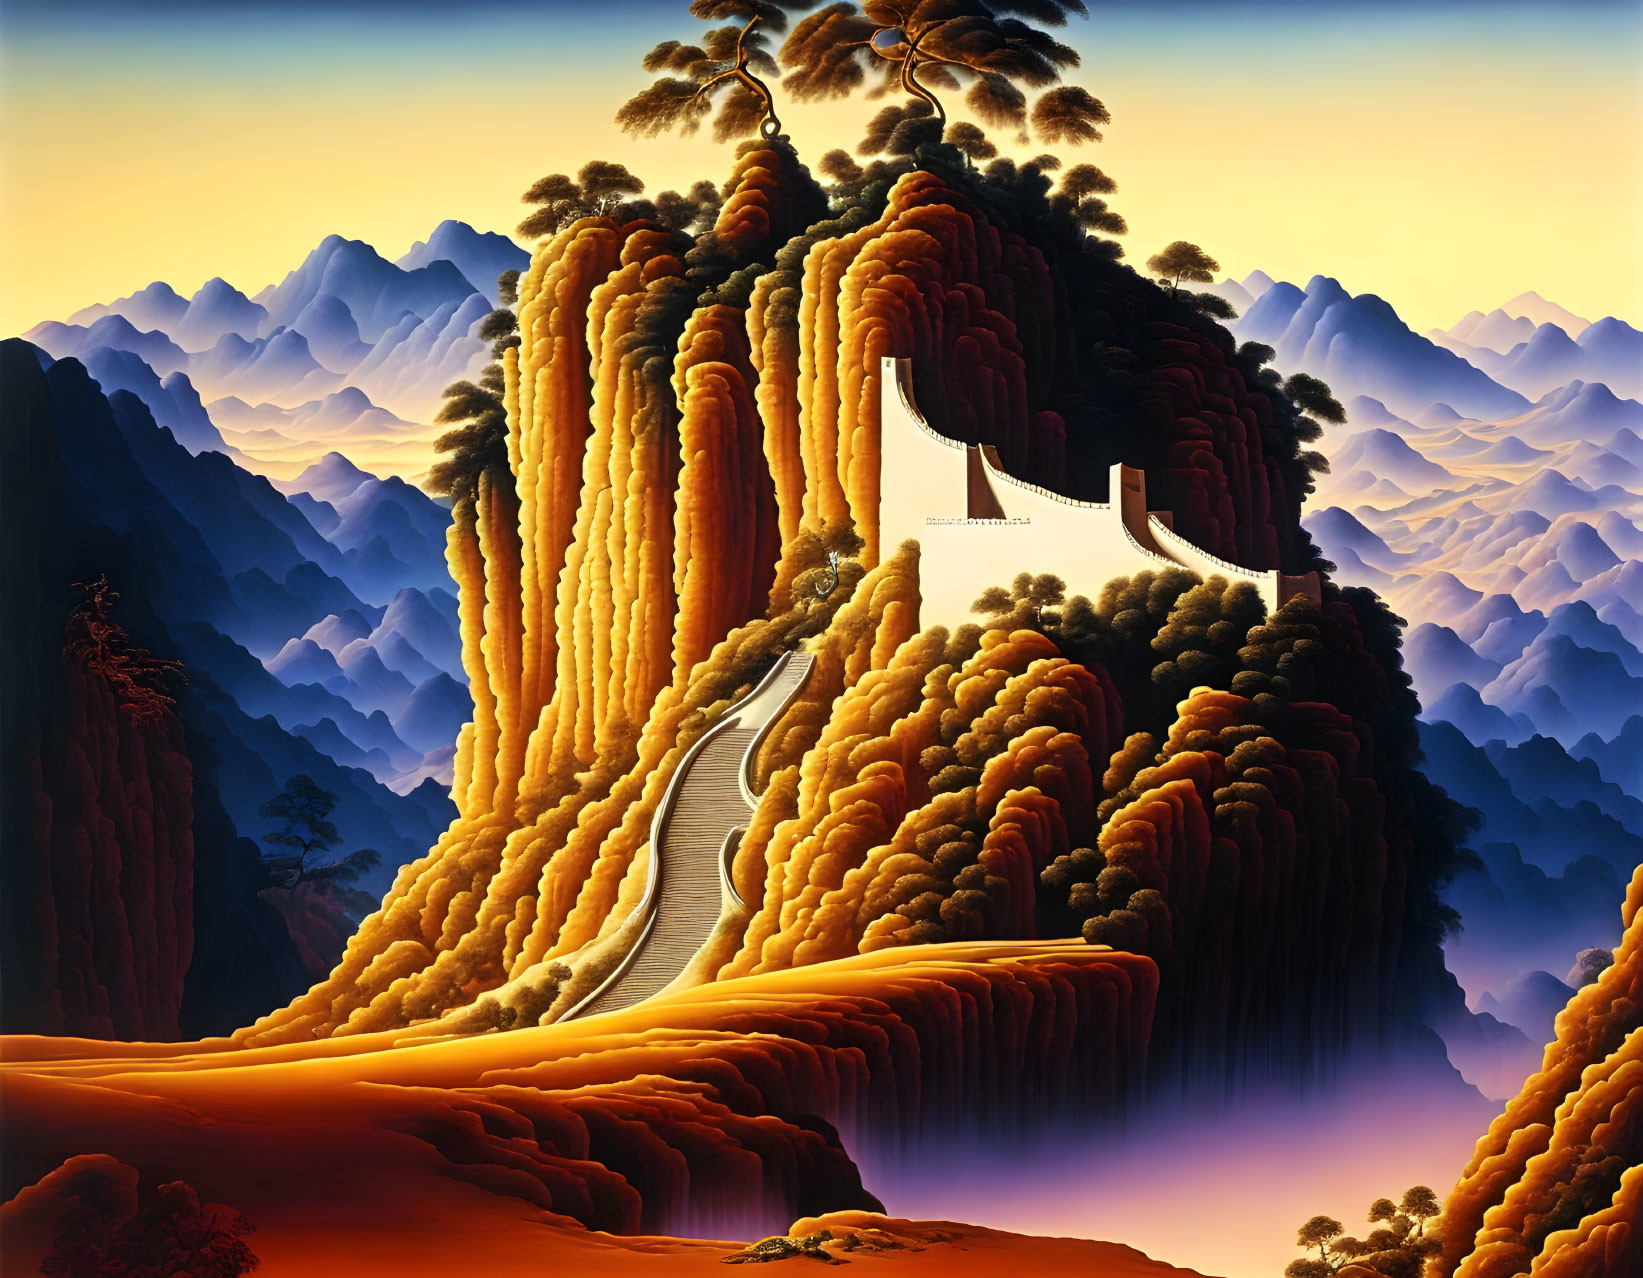 Autumn mountain painting with white pathway and traditional building.